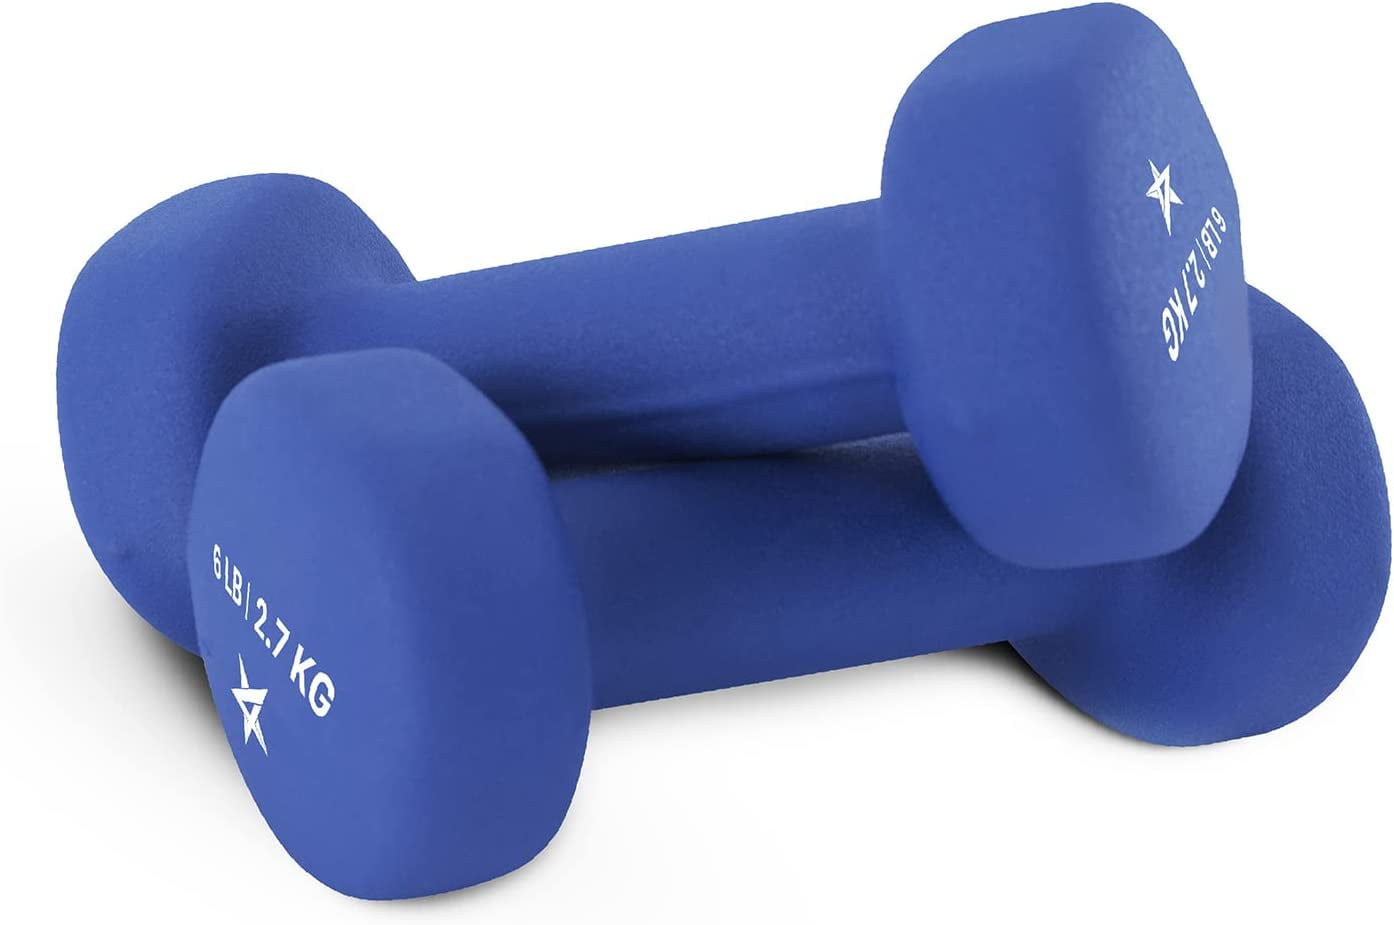 Chanel Neoprene Dumbbells For The Fit Fashionistas - StyleFrizz